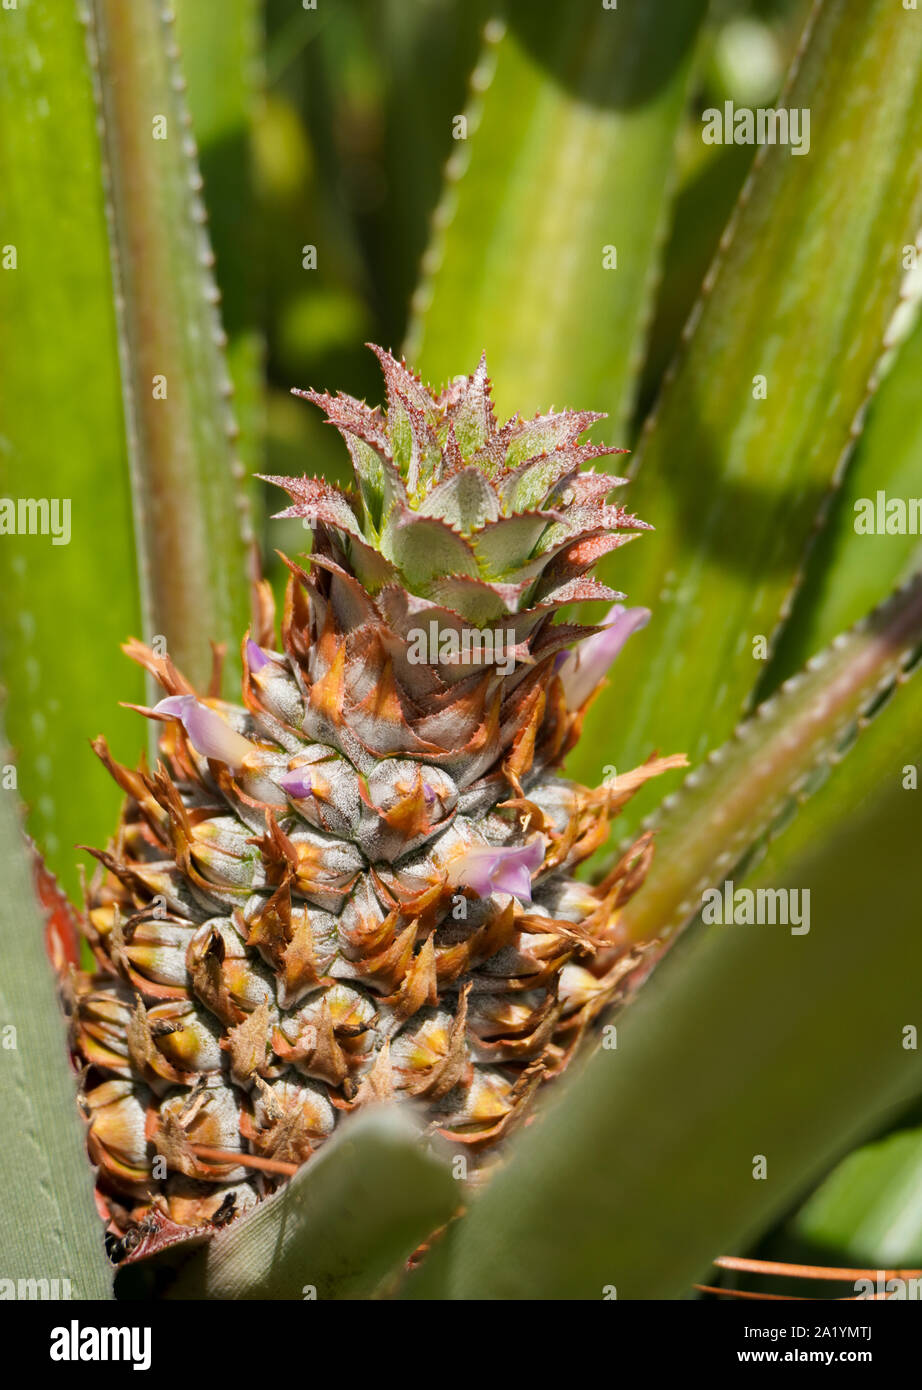 Close-up image of a young pineapple with purple flowers growing among bright green leaves Stock Photo